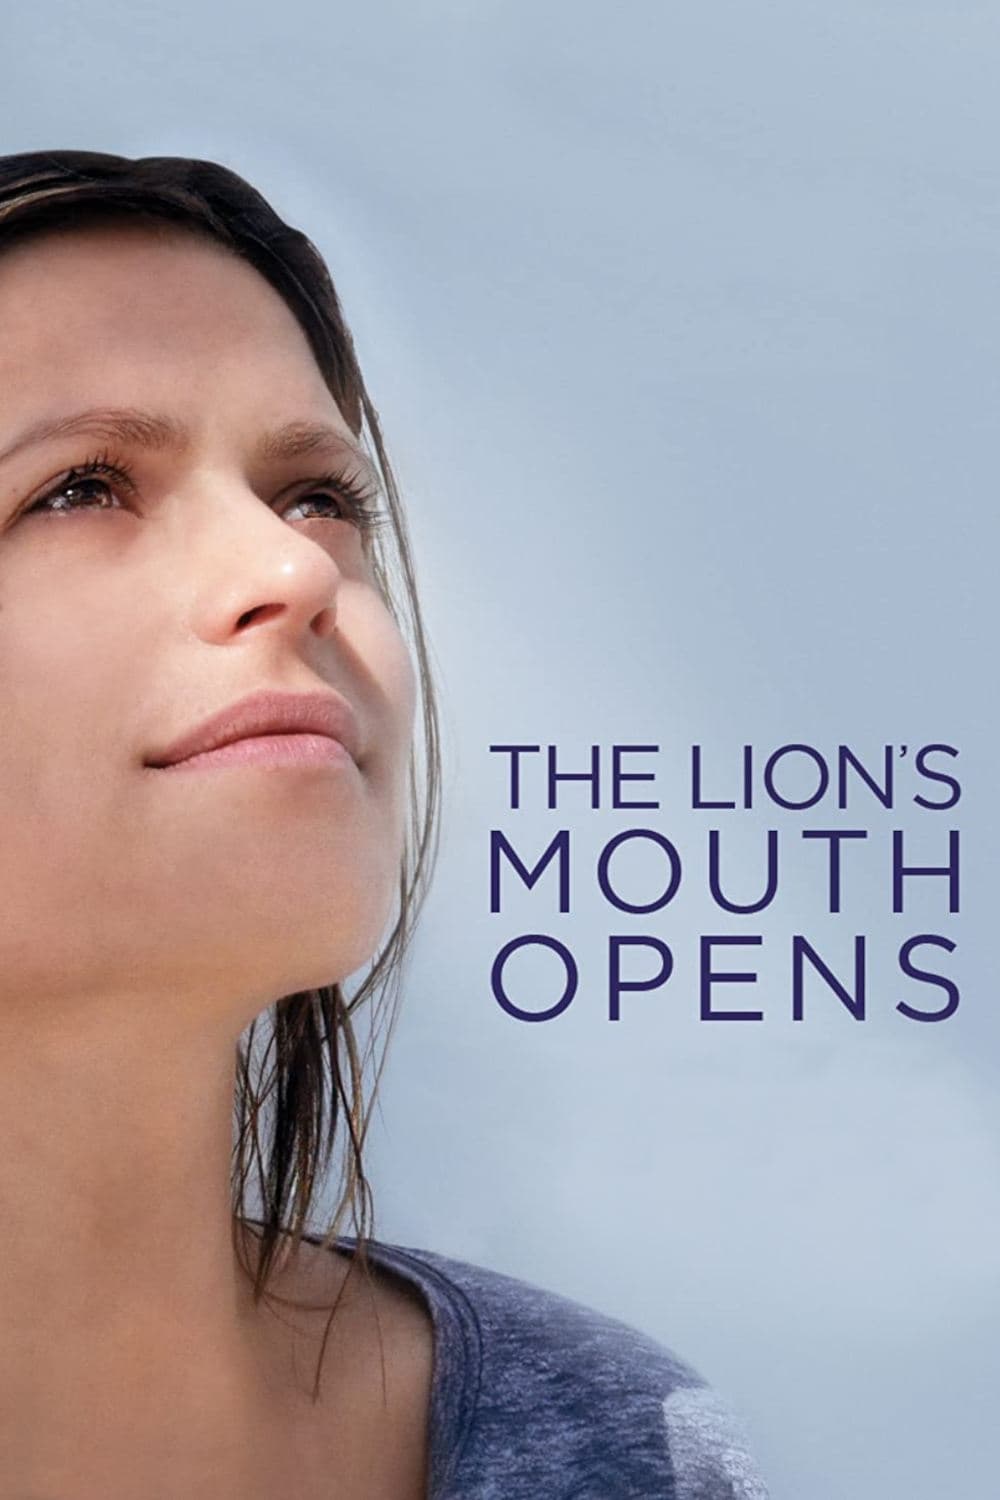 The Lion's Mouth Opens (2014)